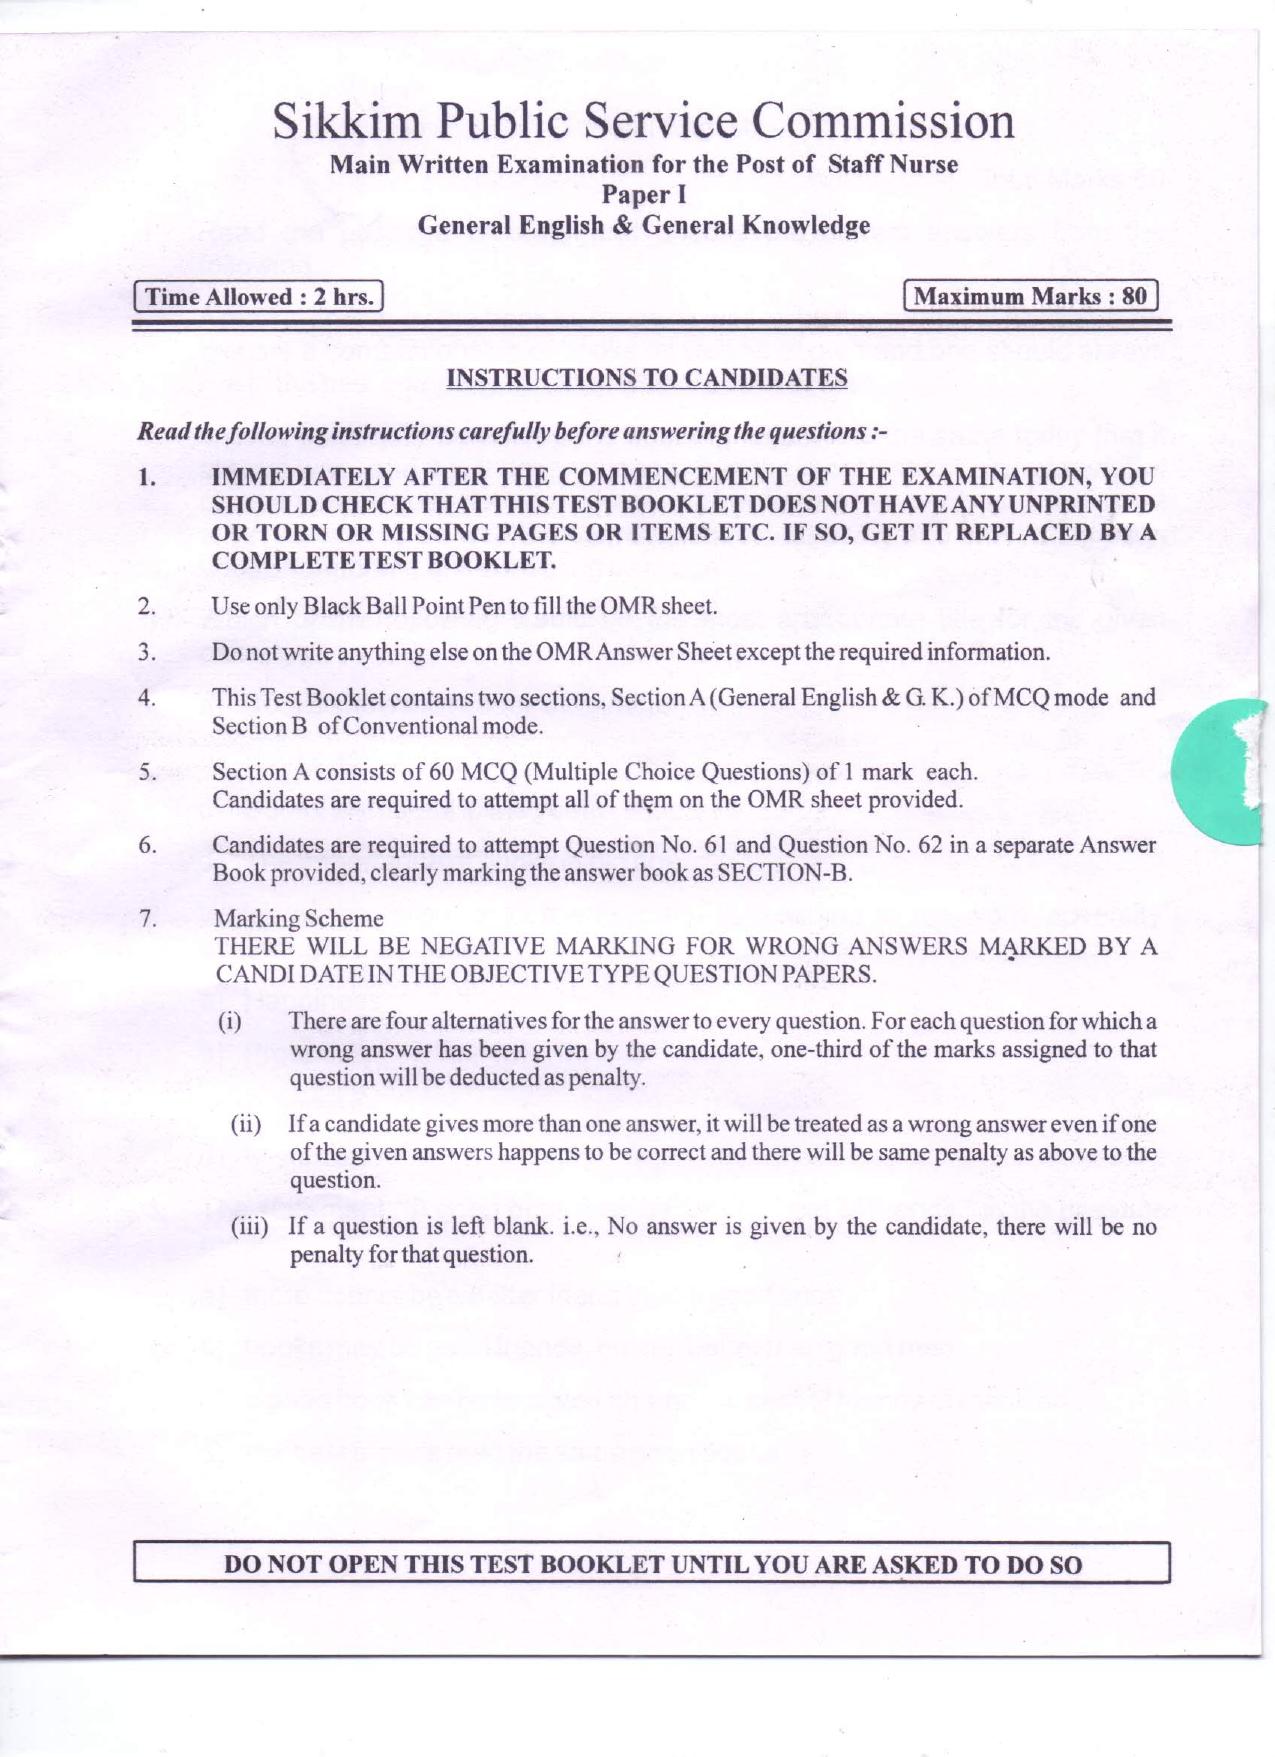 PDF Download Of SPSC MPHW General English & General Knowledge Previous Papers - Page 1